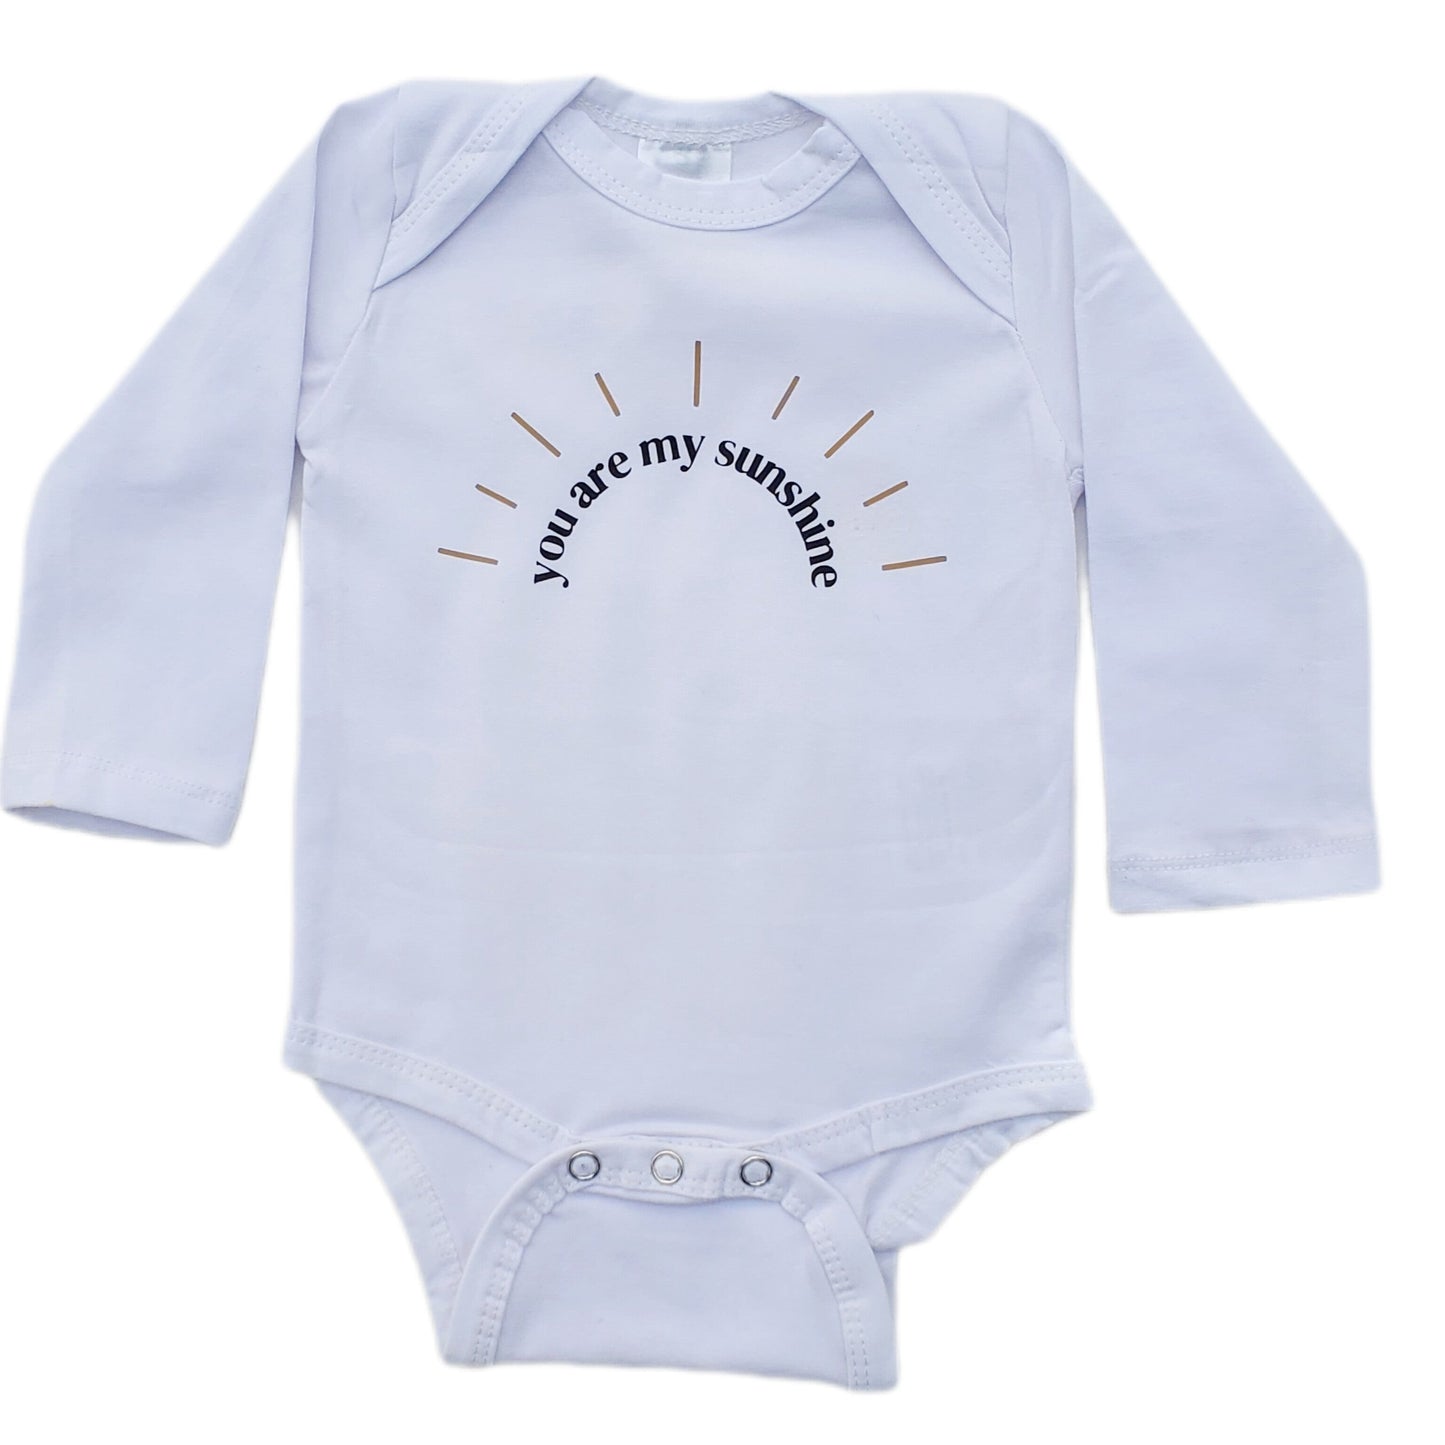 You are my sunshine - neutral tone baby onesie - unisex baby onesie - newborn outfit with cute design